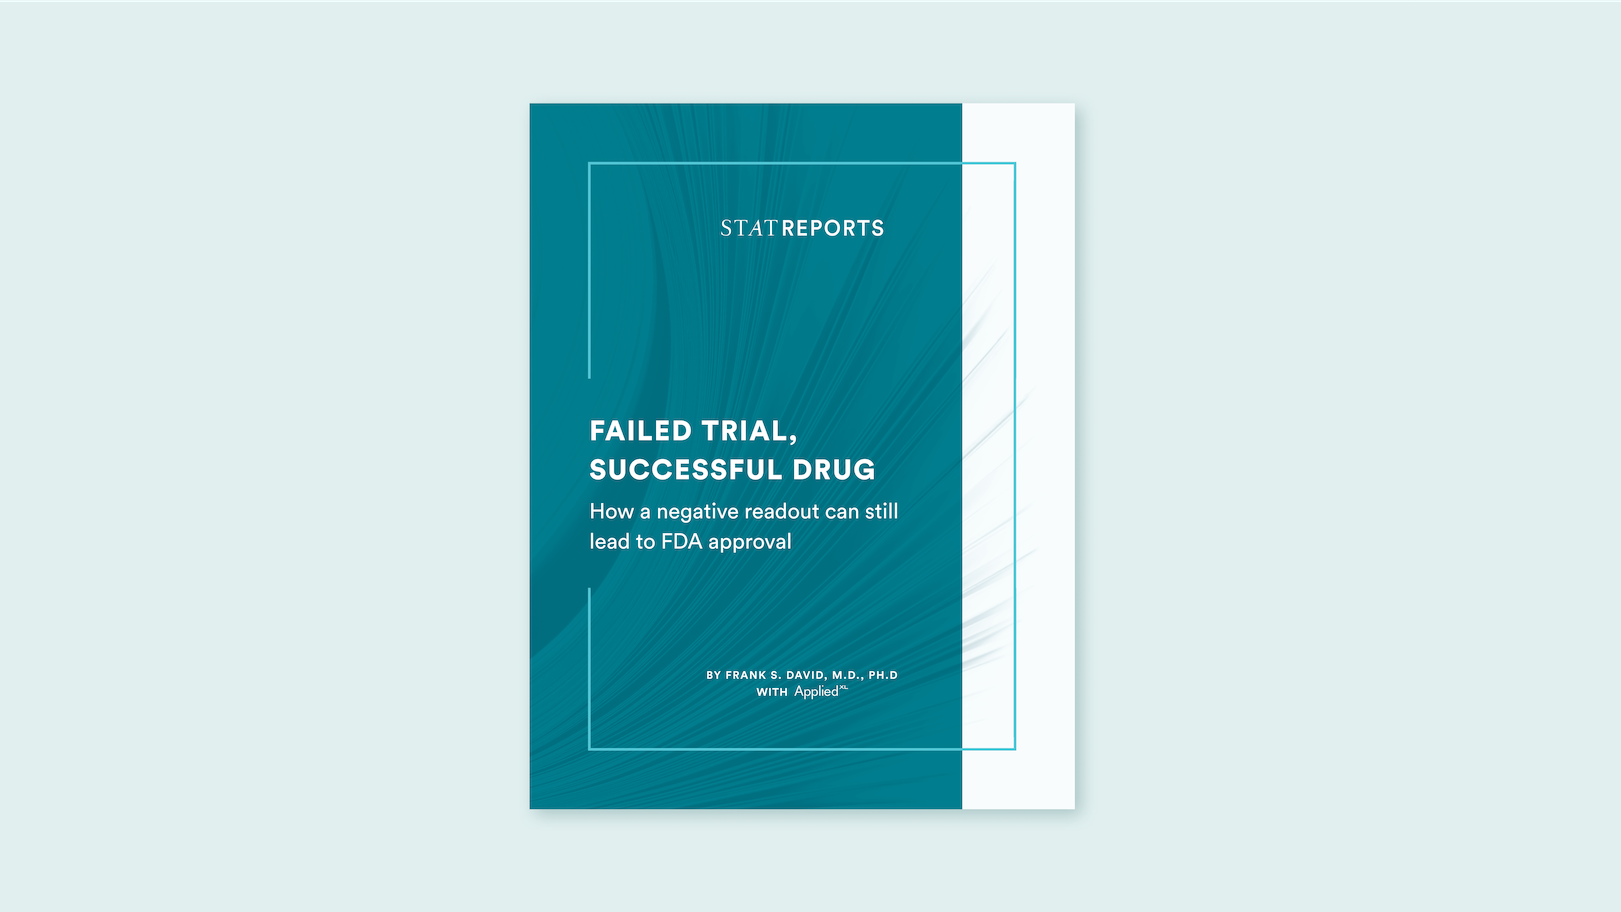 Failed trial, successful drug: How a negative readout can lead to FDA approval